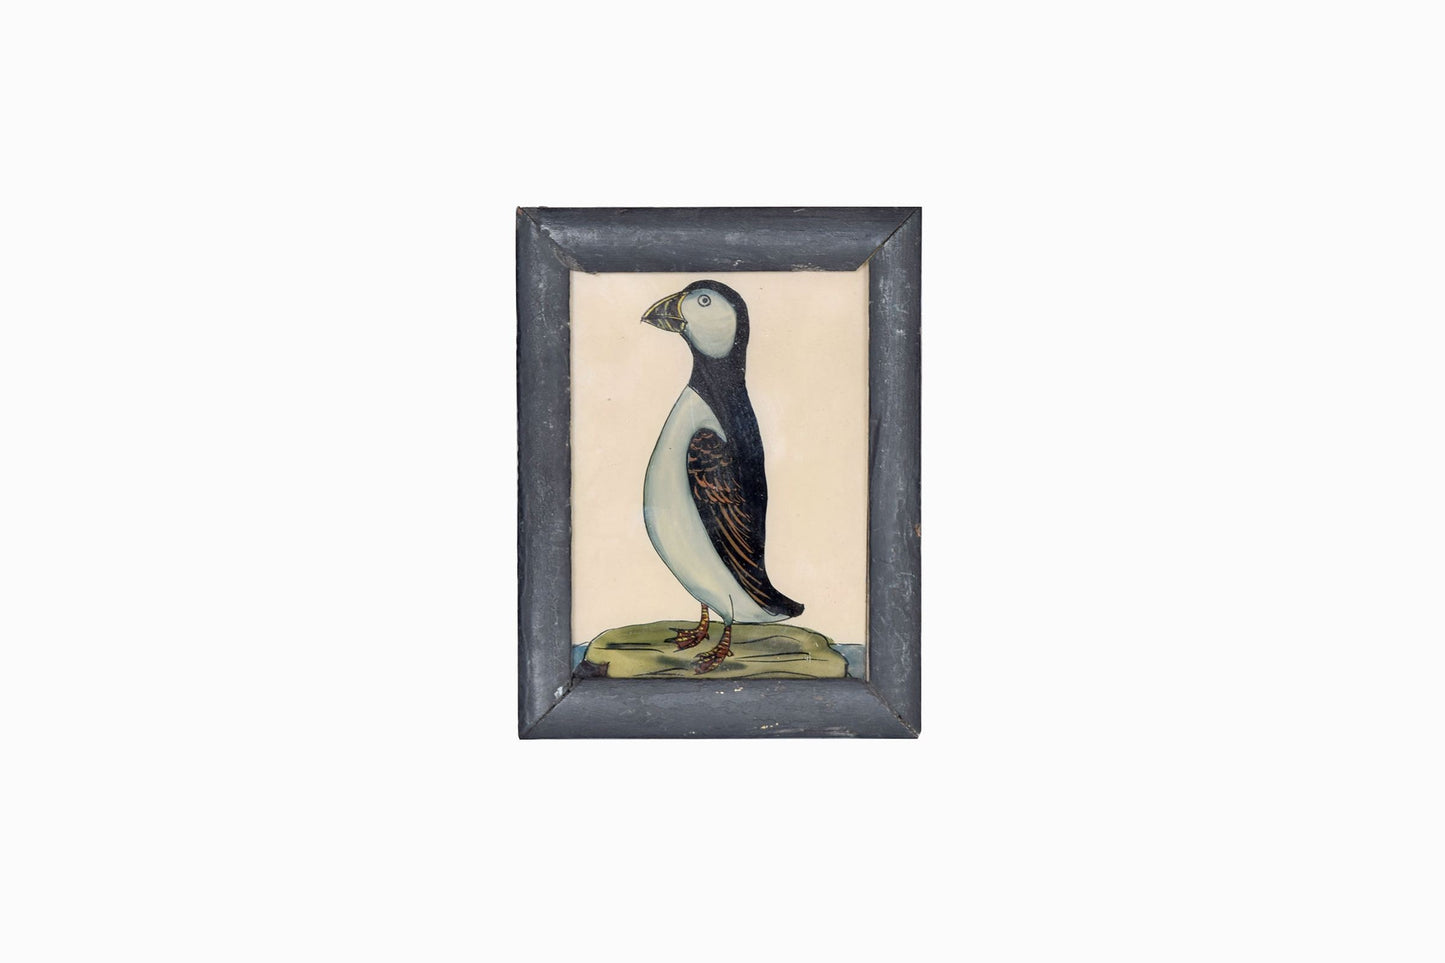 Indian glass painting of a bird with a white chest (small)